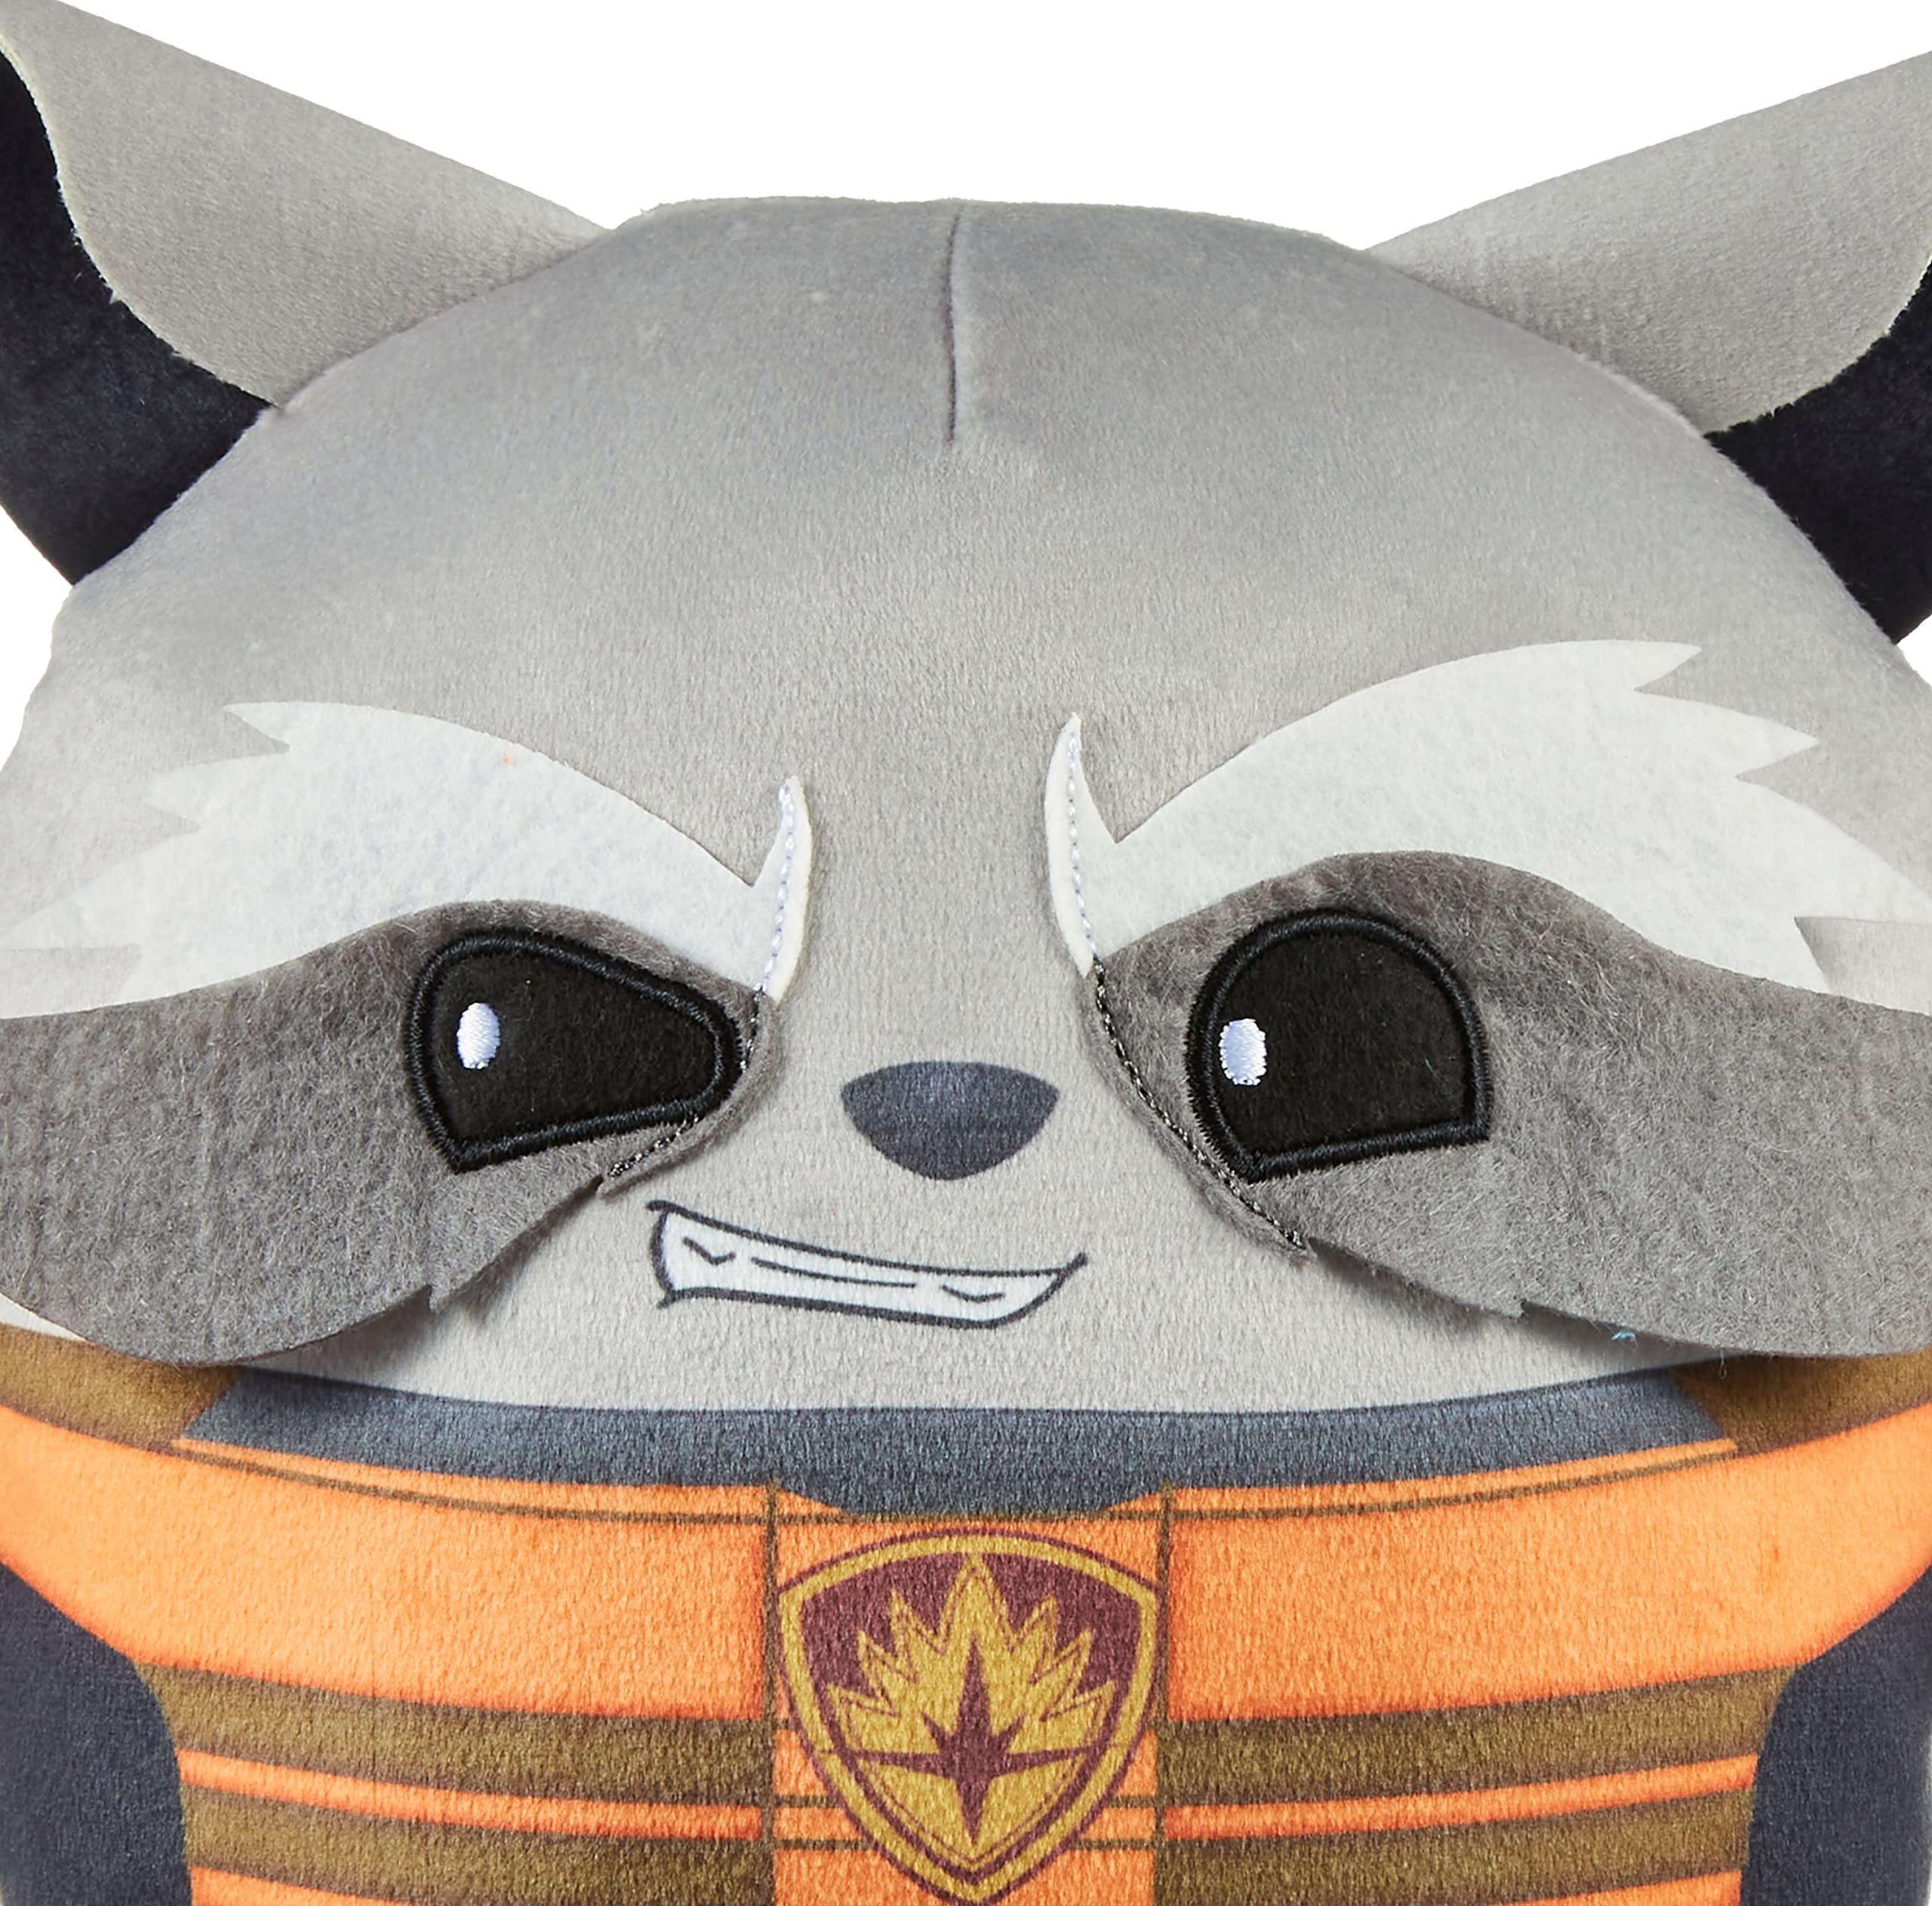 Mattel Marvel Cuutopia 10-inch Rocket Raccoon Plush Character, Super Hero Soft Rounded Pillow Doll, Collectible Toy Gift for Kids & Fans Ages 3 Years Old & Up